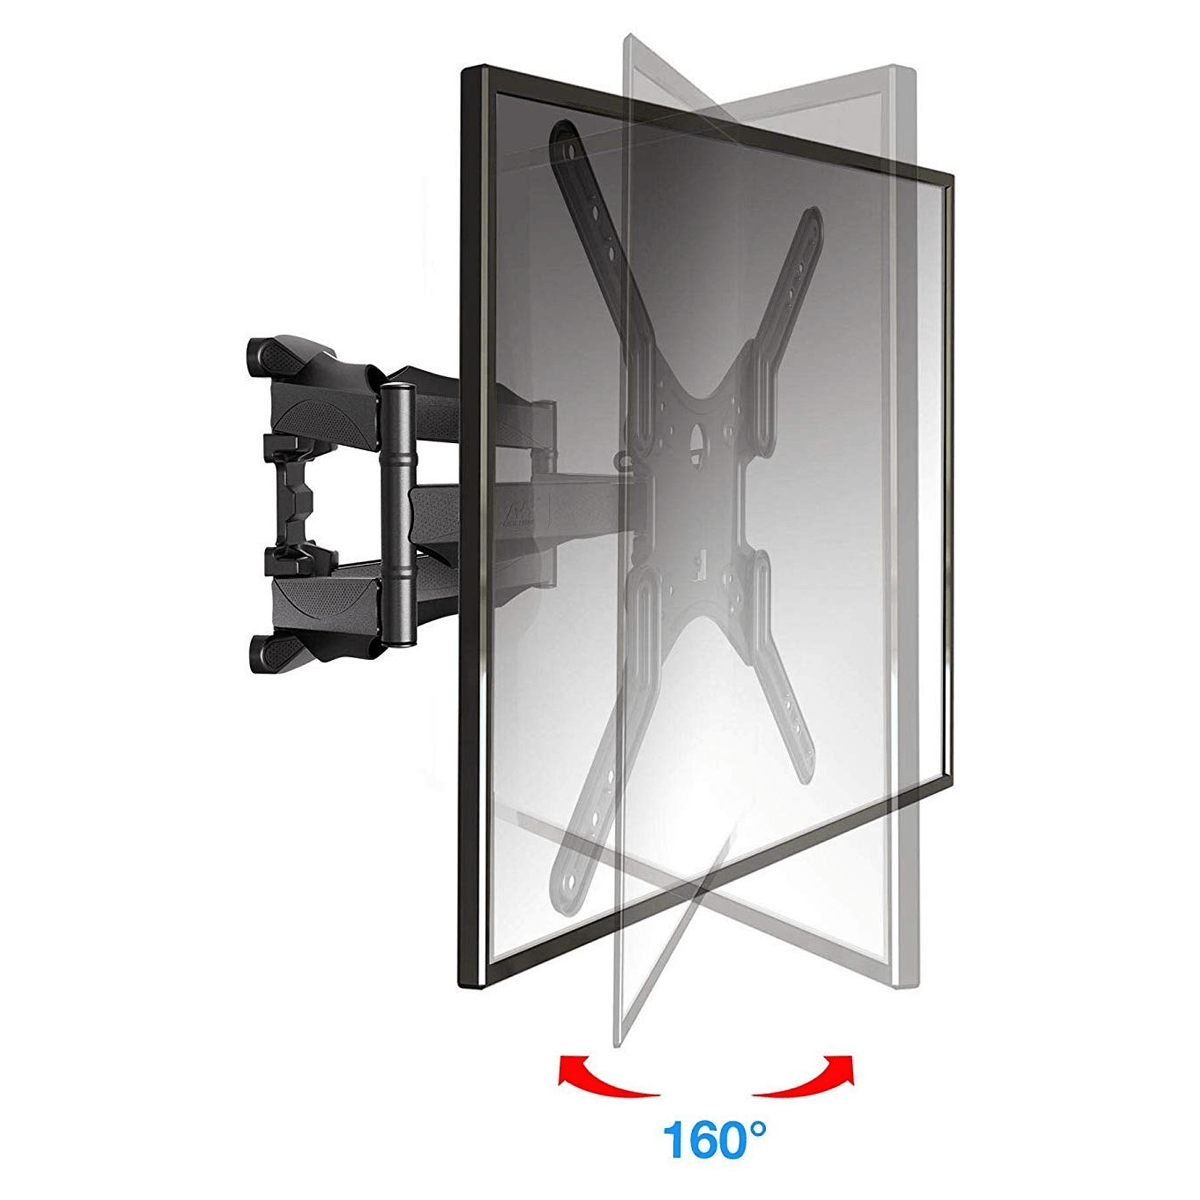 Full Motion TV Wall Mount for Most 32-55 Inches LED LCD Computer Monitors and TVs - NB